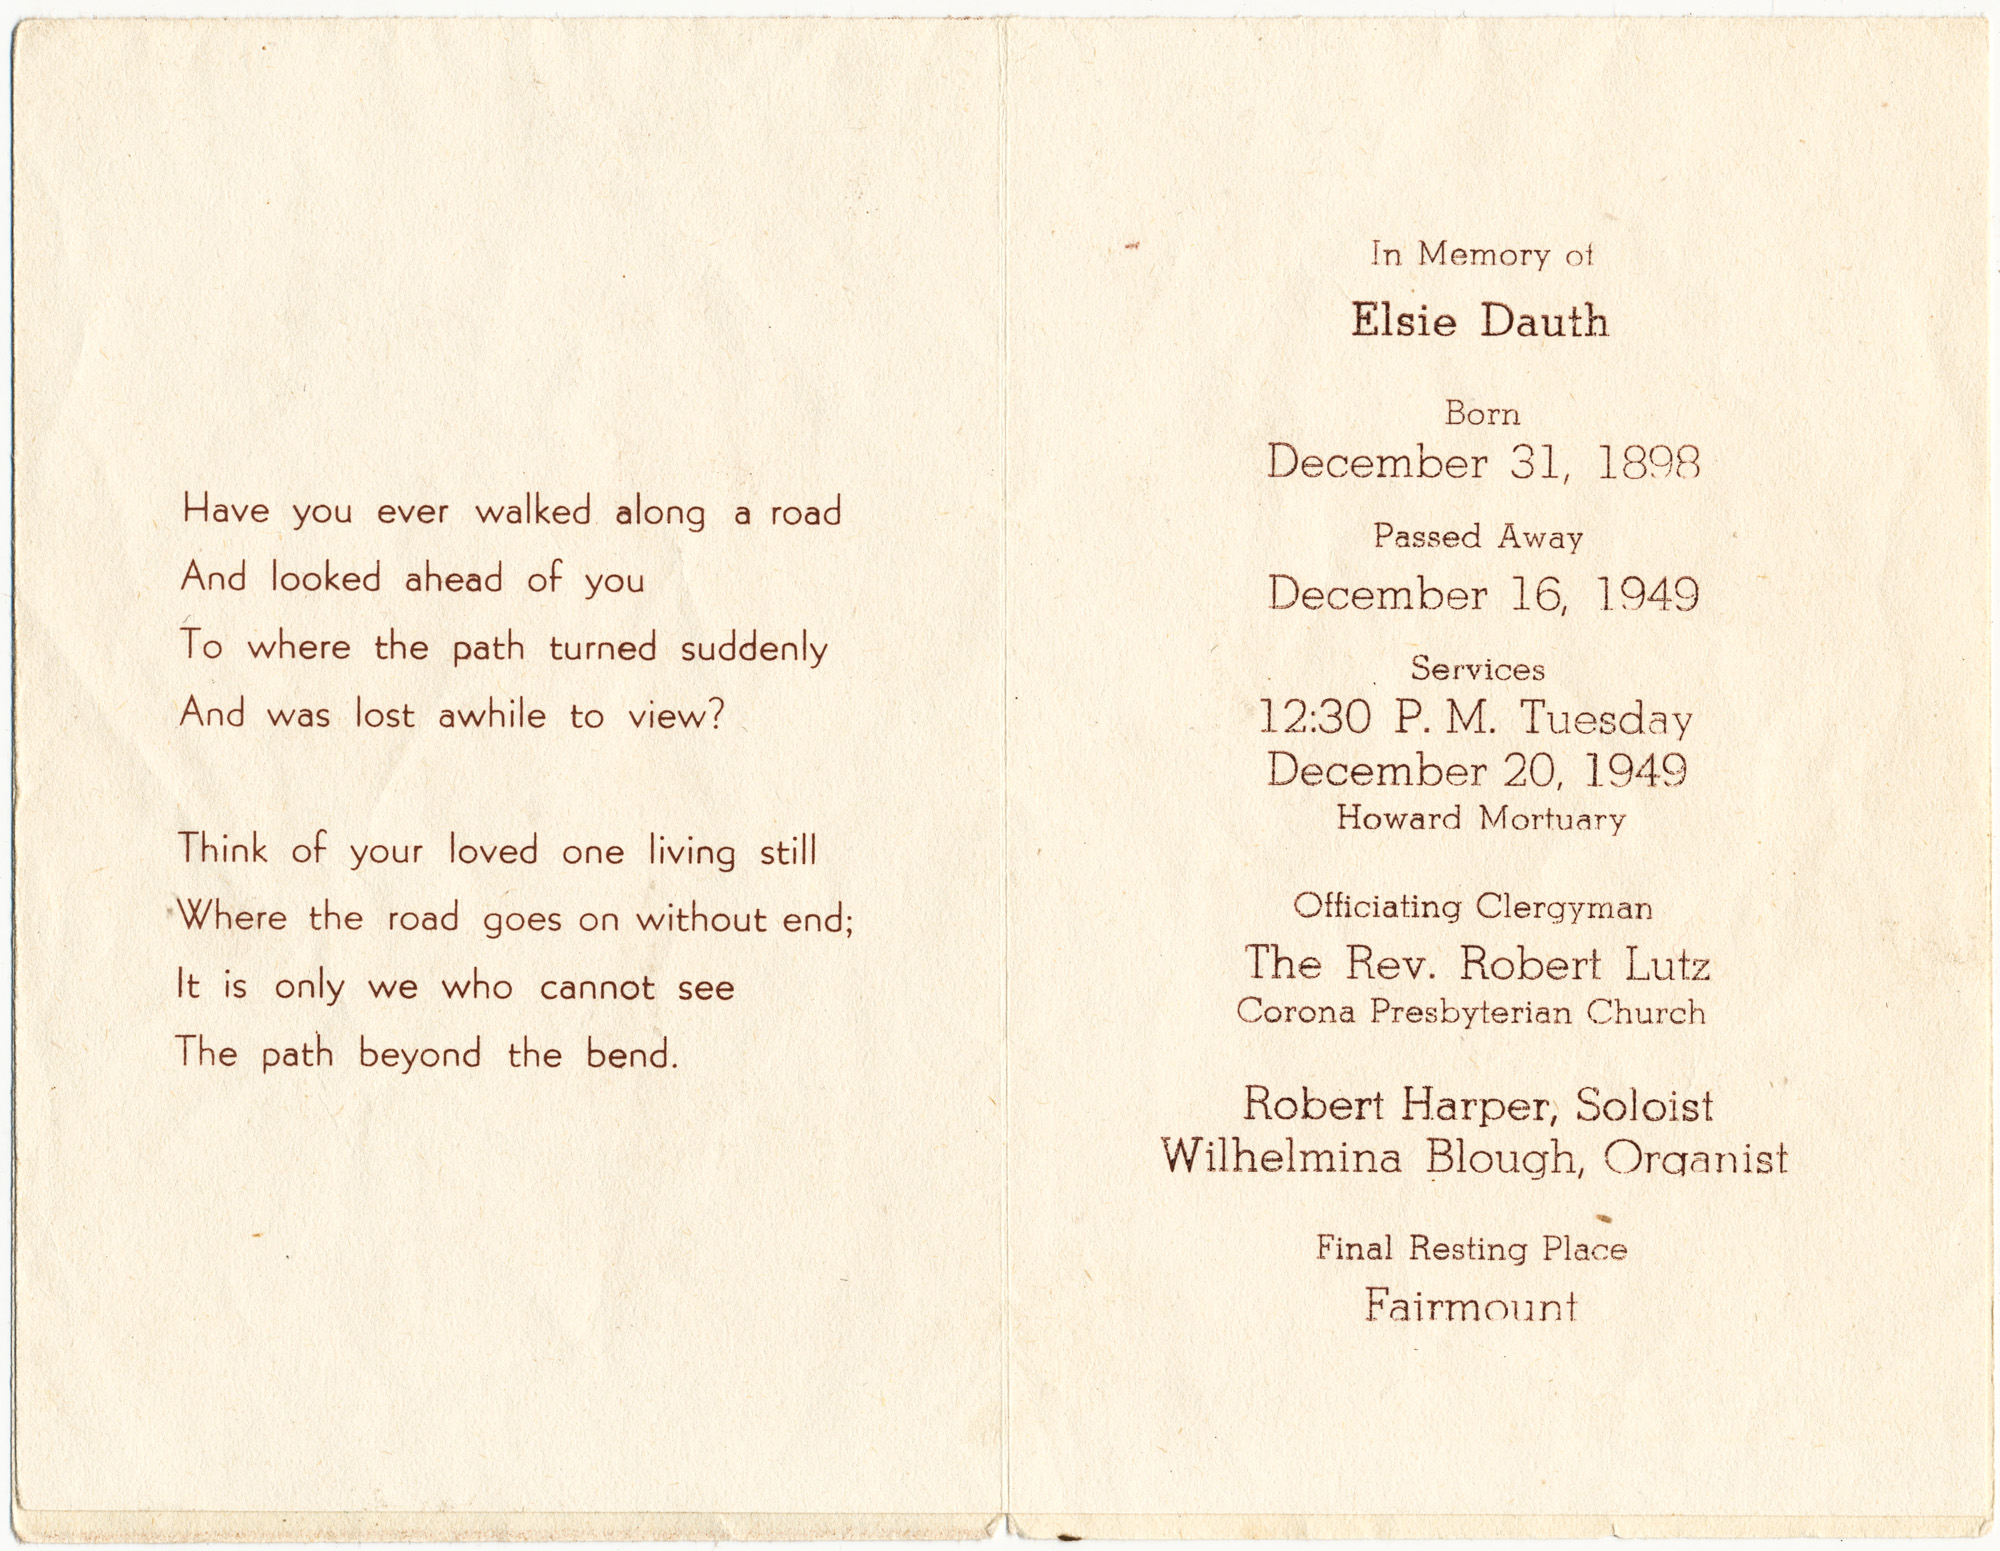 Dauth Family Archive - 1949-12-16 - Elsie Dauth Obituary